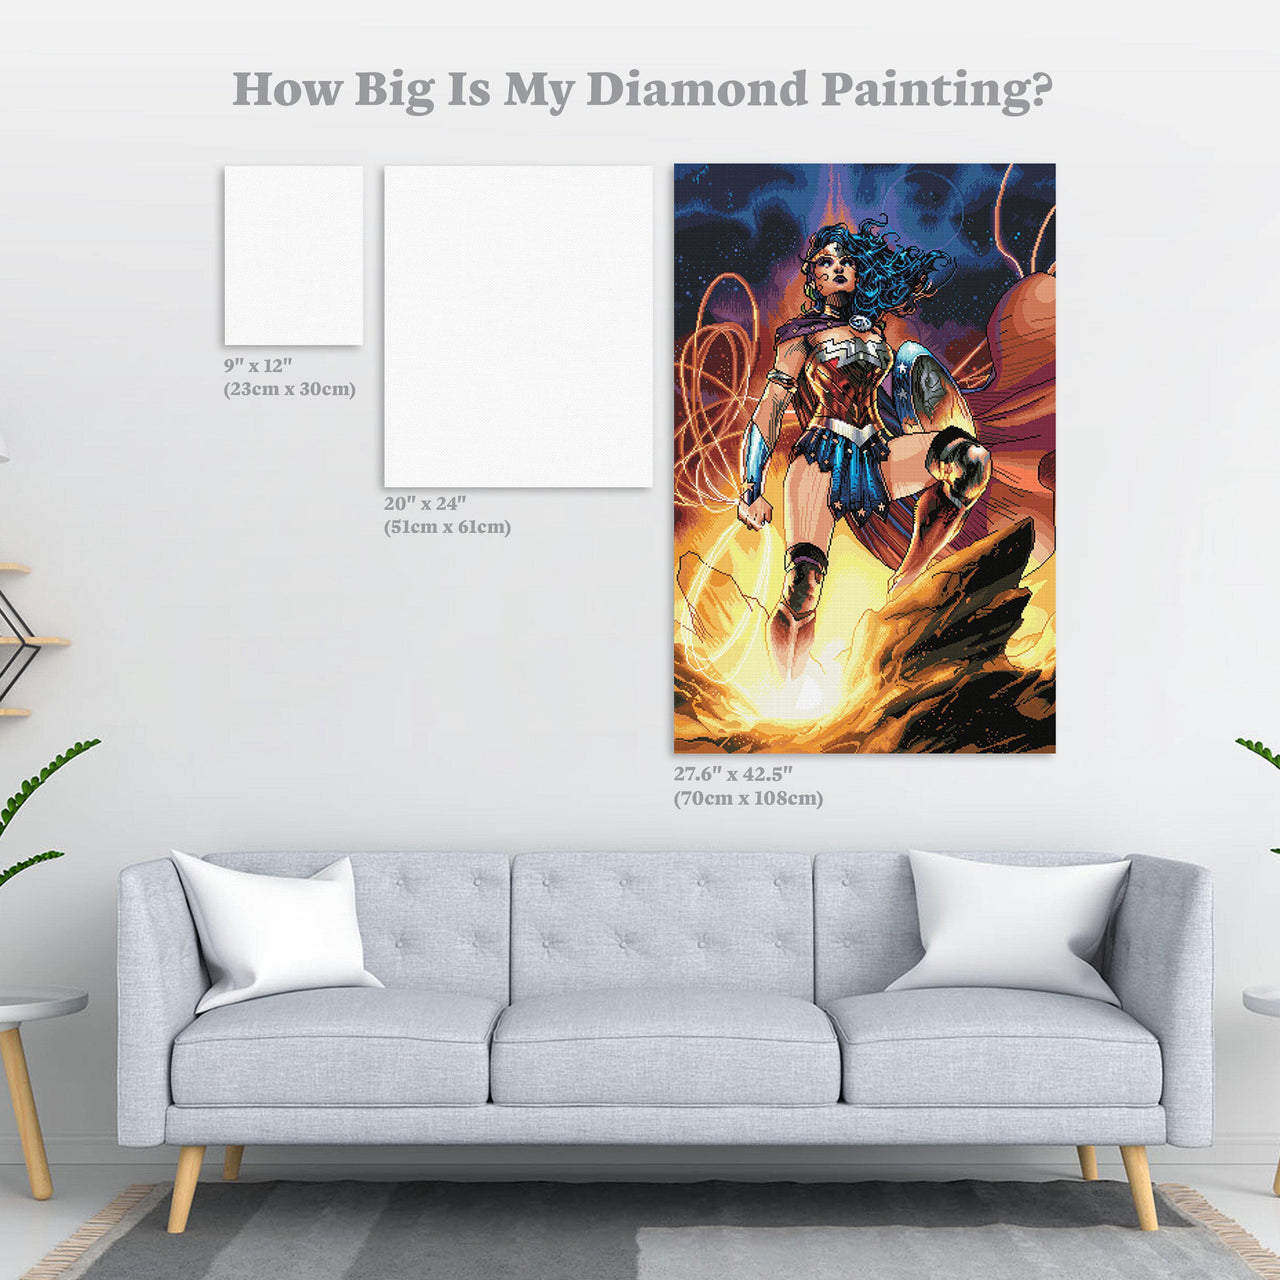 Diamond Painting The Golden Lasso 27.6" x 42.5″ (70cm x 108cm) / Square with 51 Colors including 2 ABs / 118,556